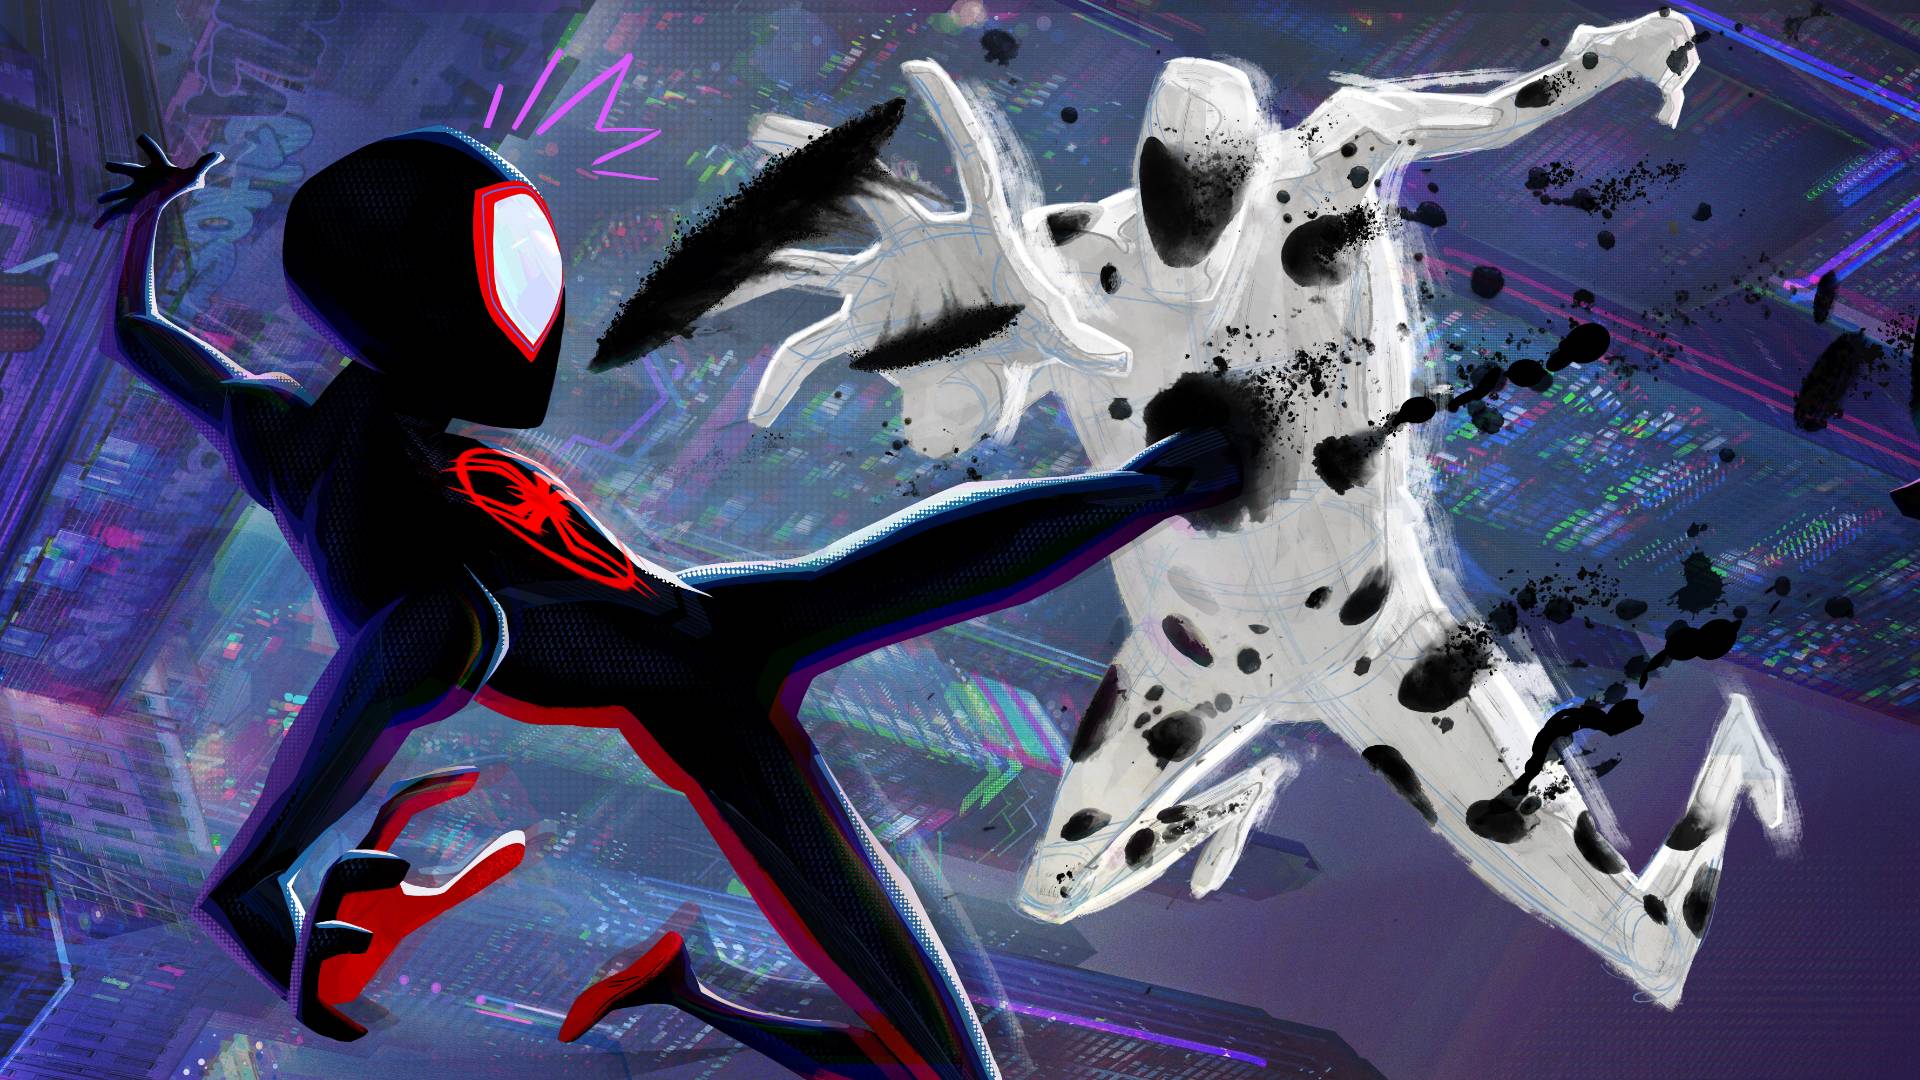 A Spider Society on the Multiverse(Across the Spider-Verse x Male